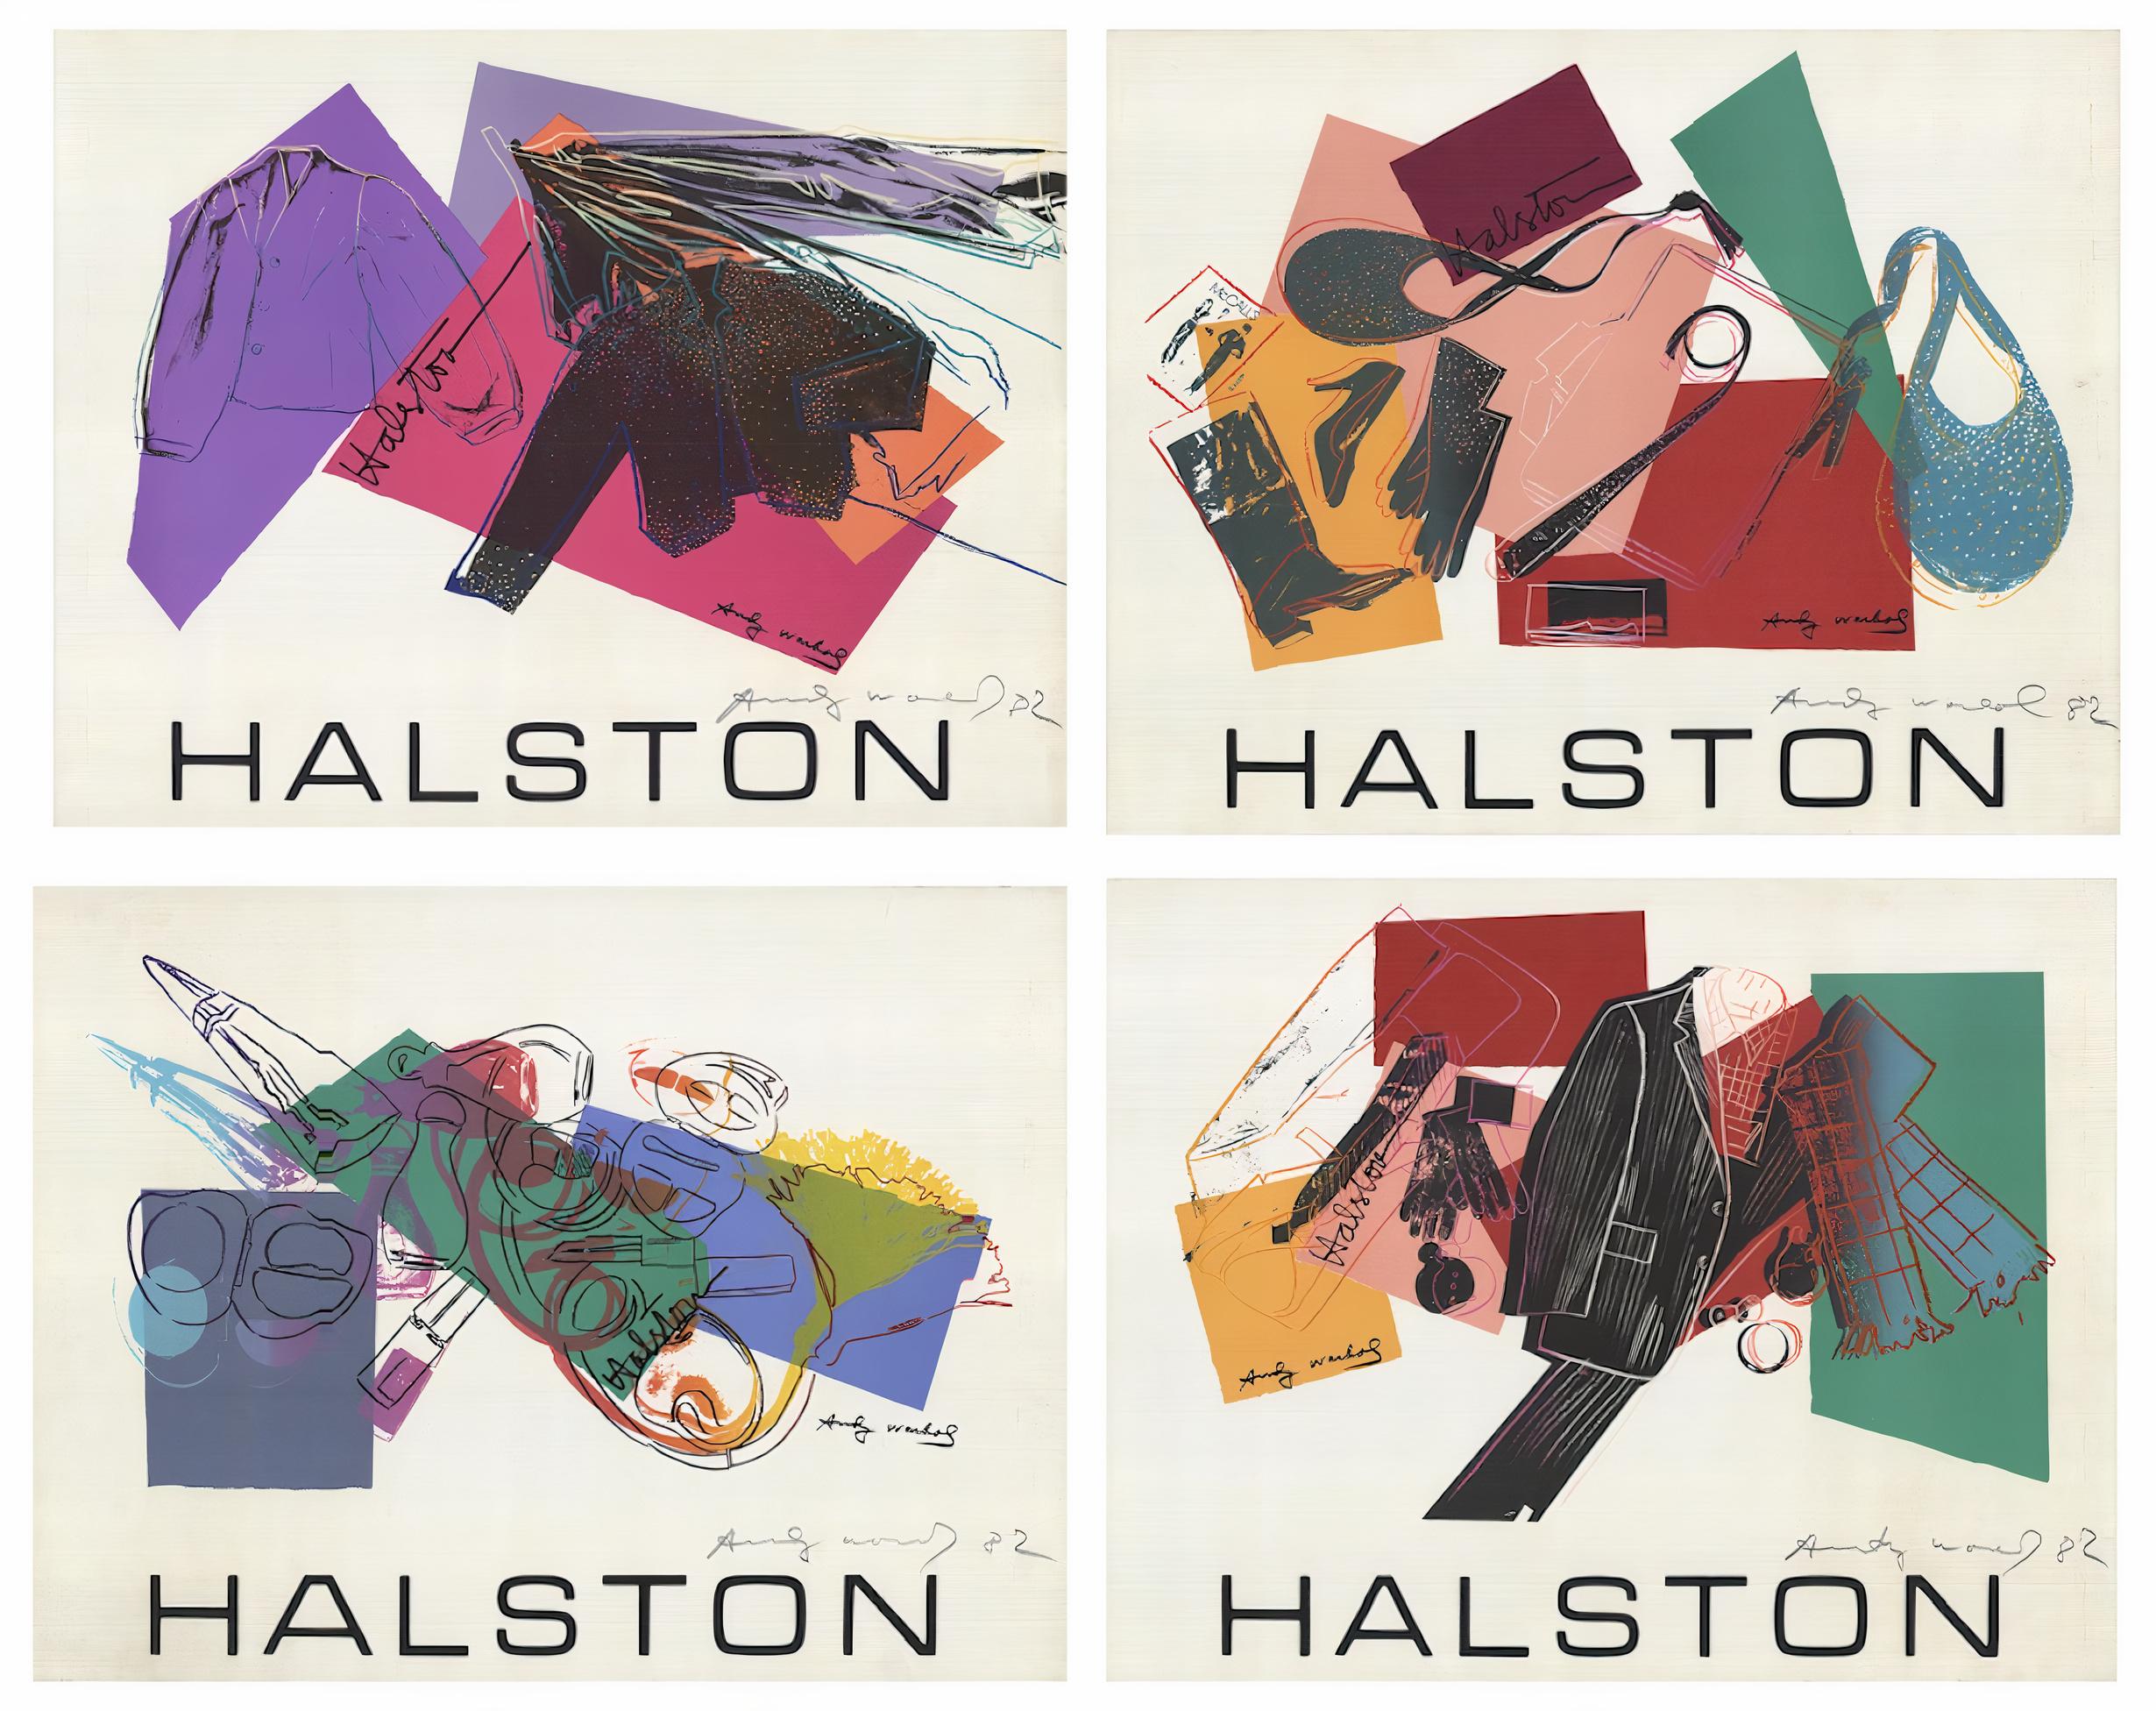 4 Assorted Warhol + Halston One-of-a-kind Rare & Signed Serigraphs - Print by Andy Warhol